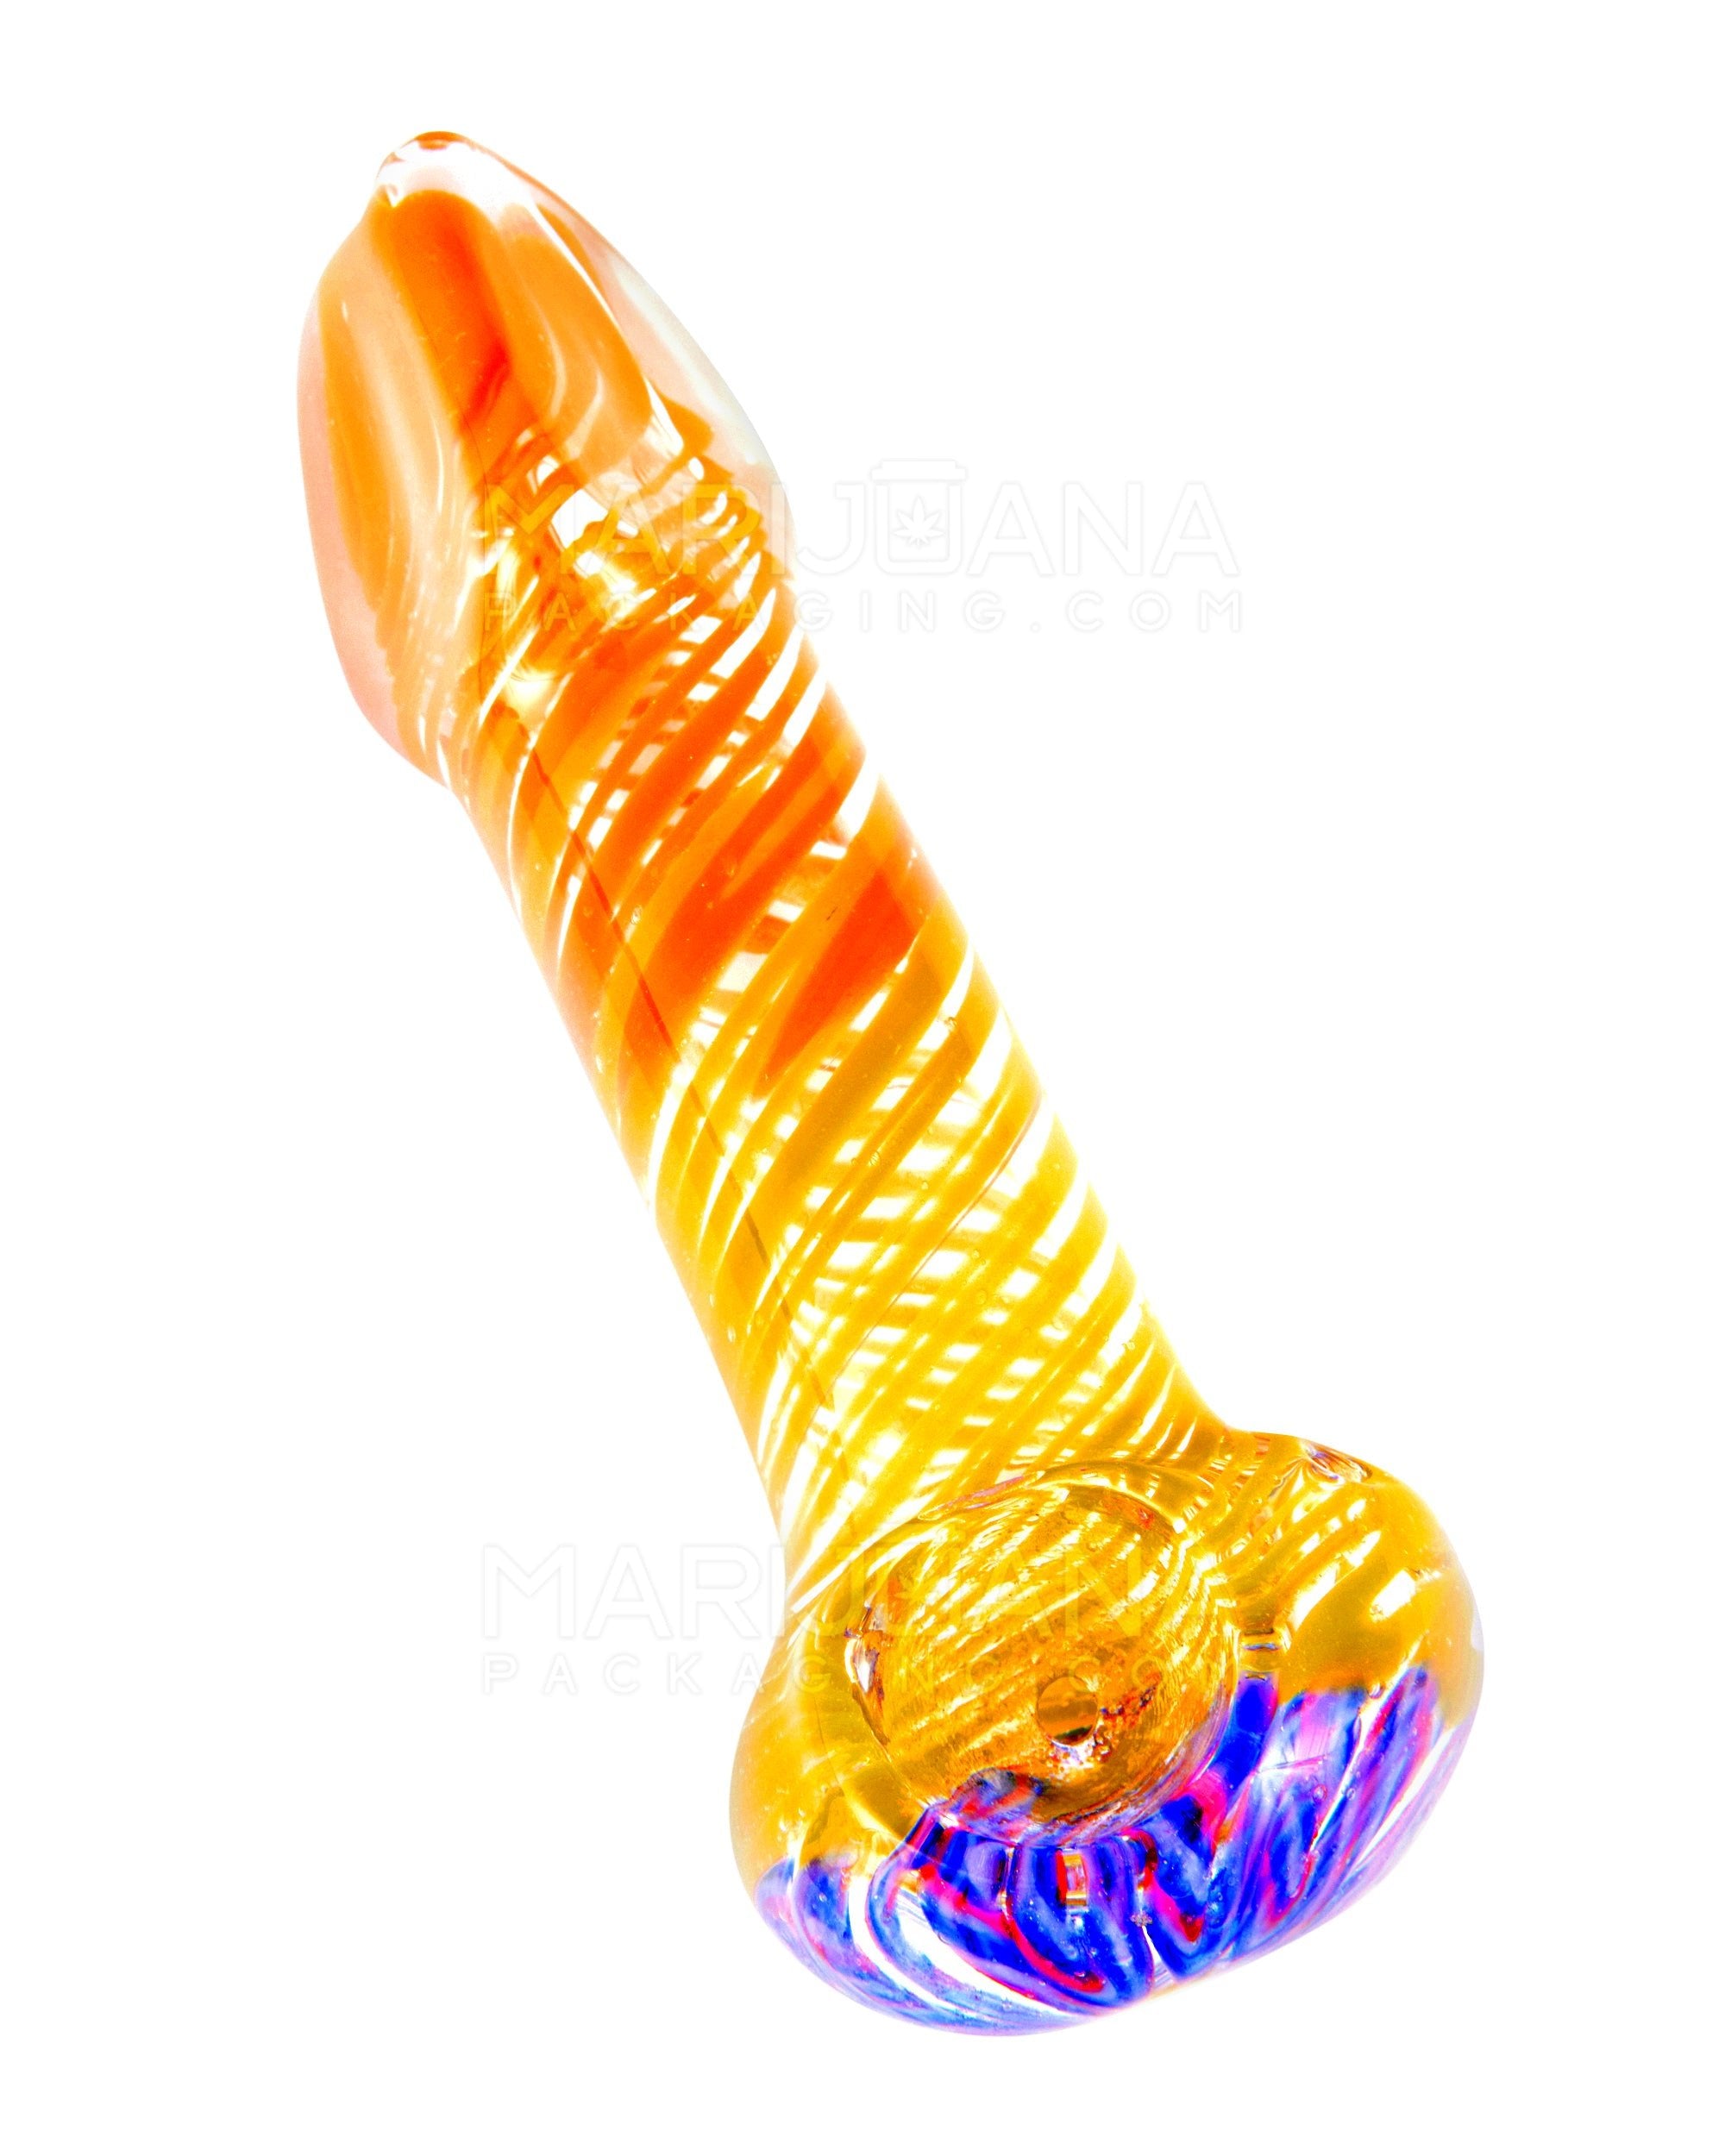 Variety Mouthpiece Spiral Spoon Hand Pipe w/ Ribboning | 4.5in Long - Glass - Assorted - 8